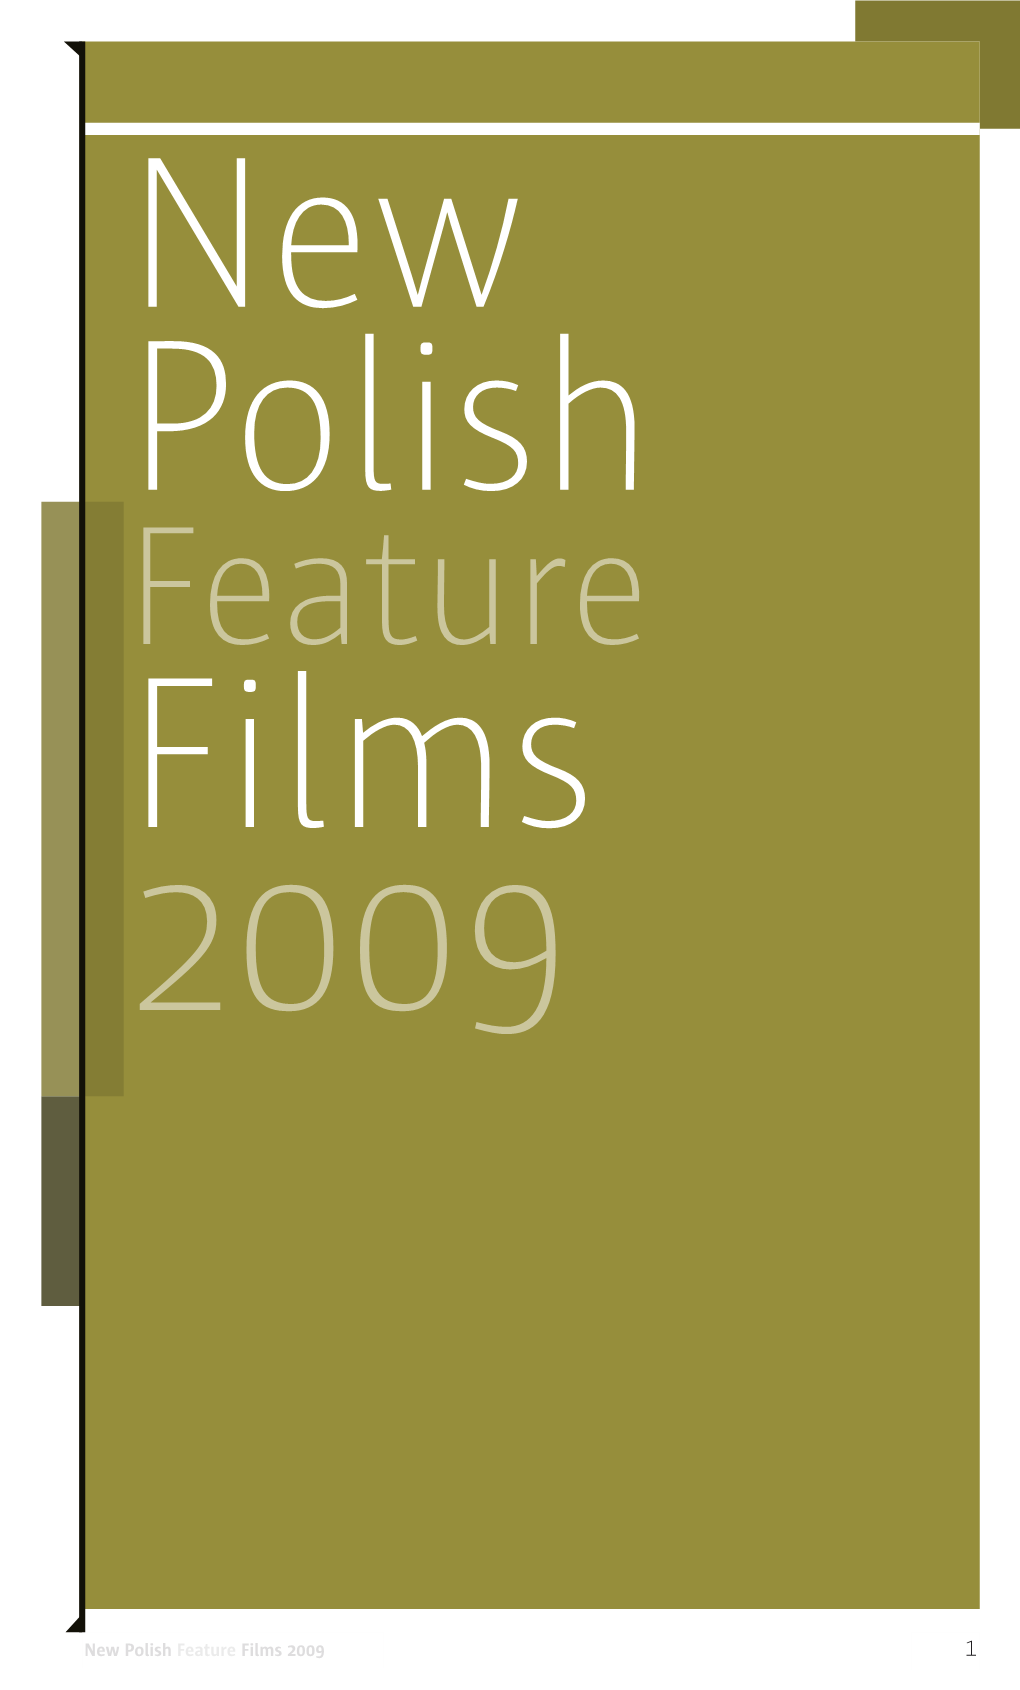 New Polish Feature Films 2009